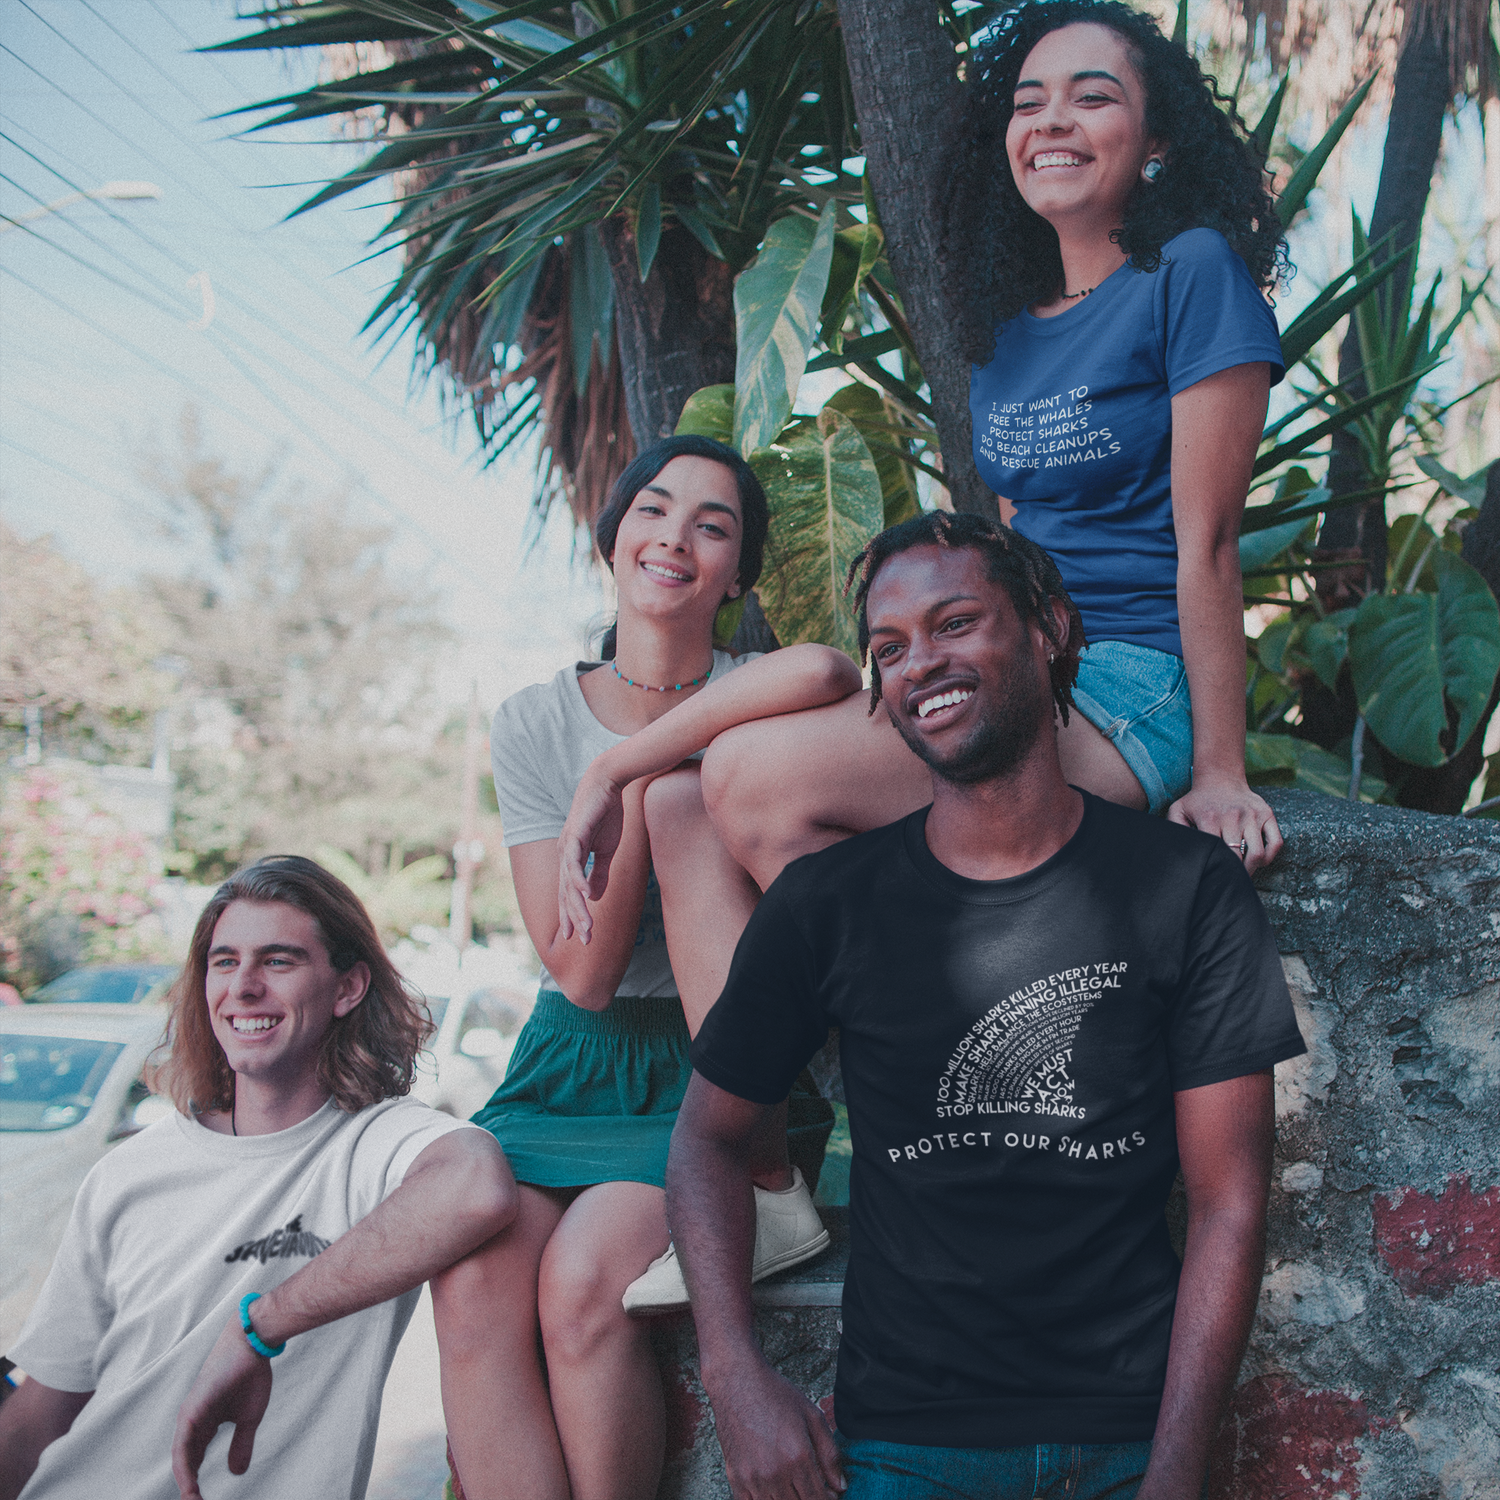 group of friends smiling while wearing architectconstructor shirts - ethically and sustainably made products that give back to non-profit organizations